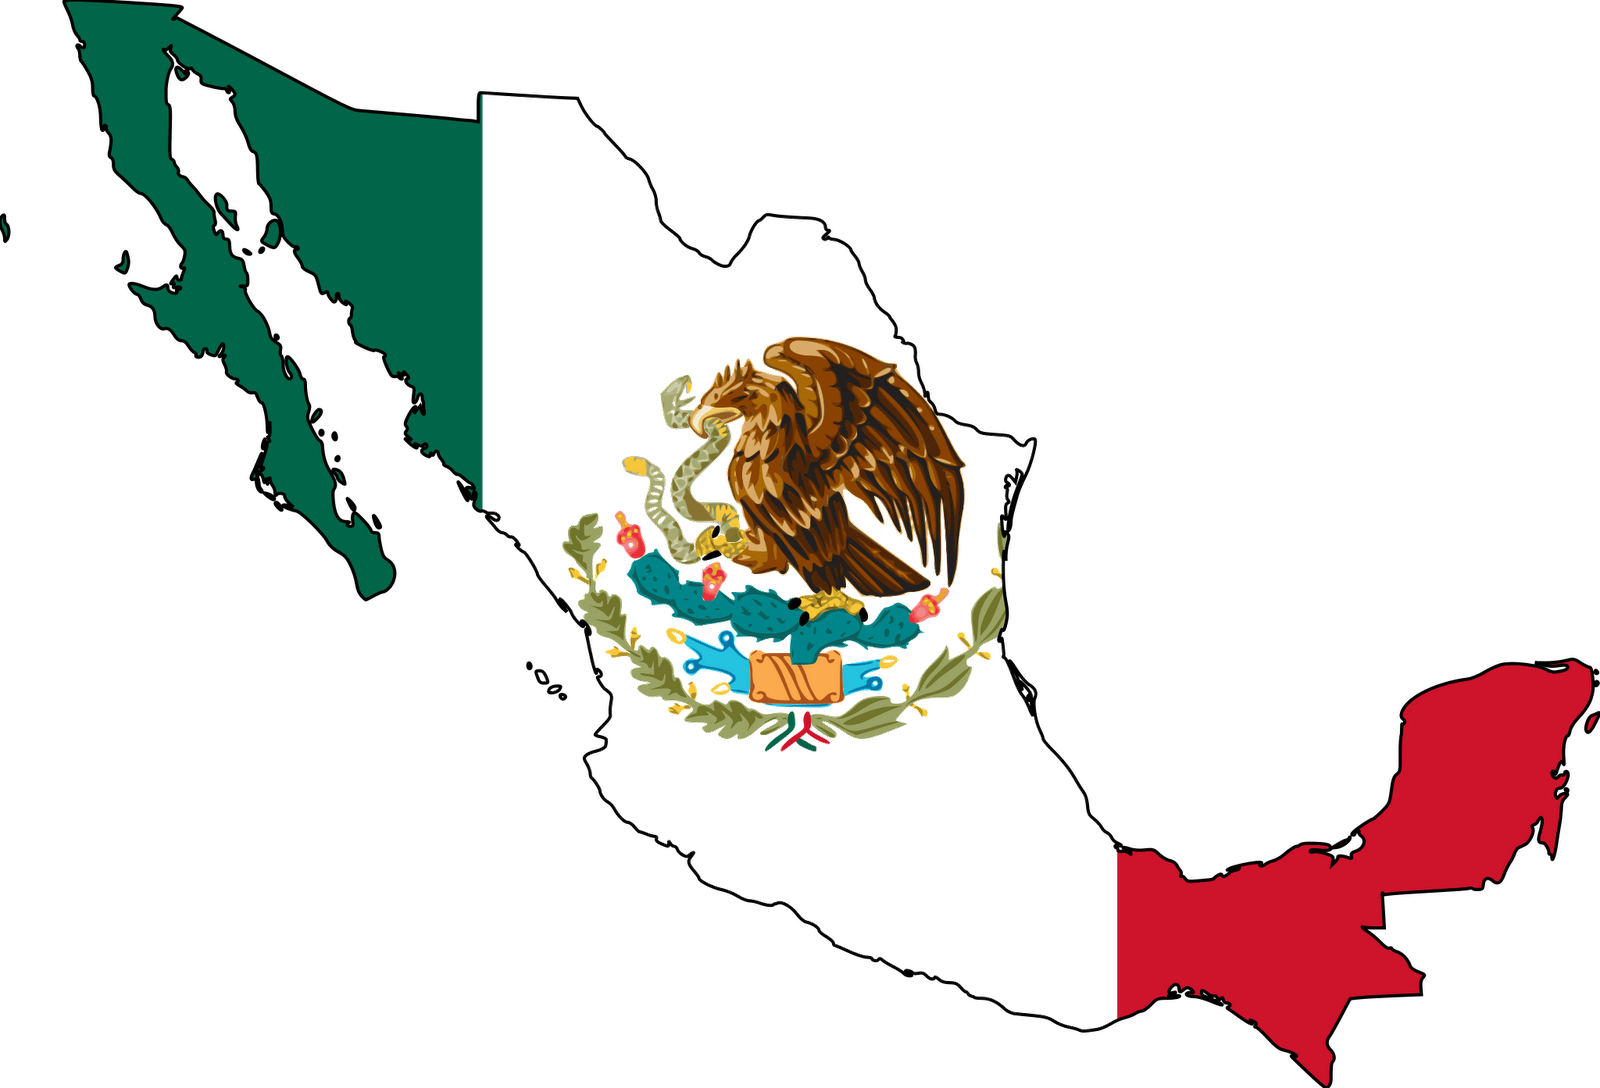 Mexican Flag Symbol Picture - ClipArt Best